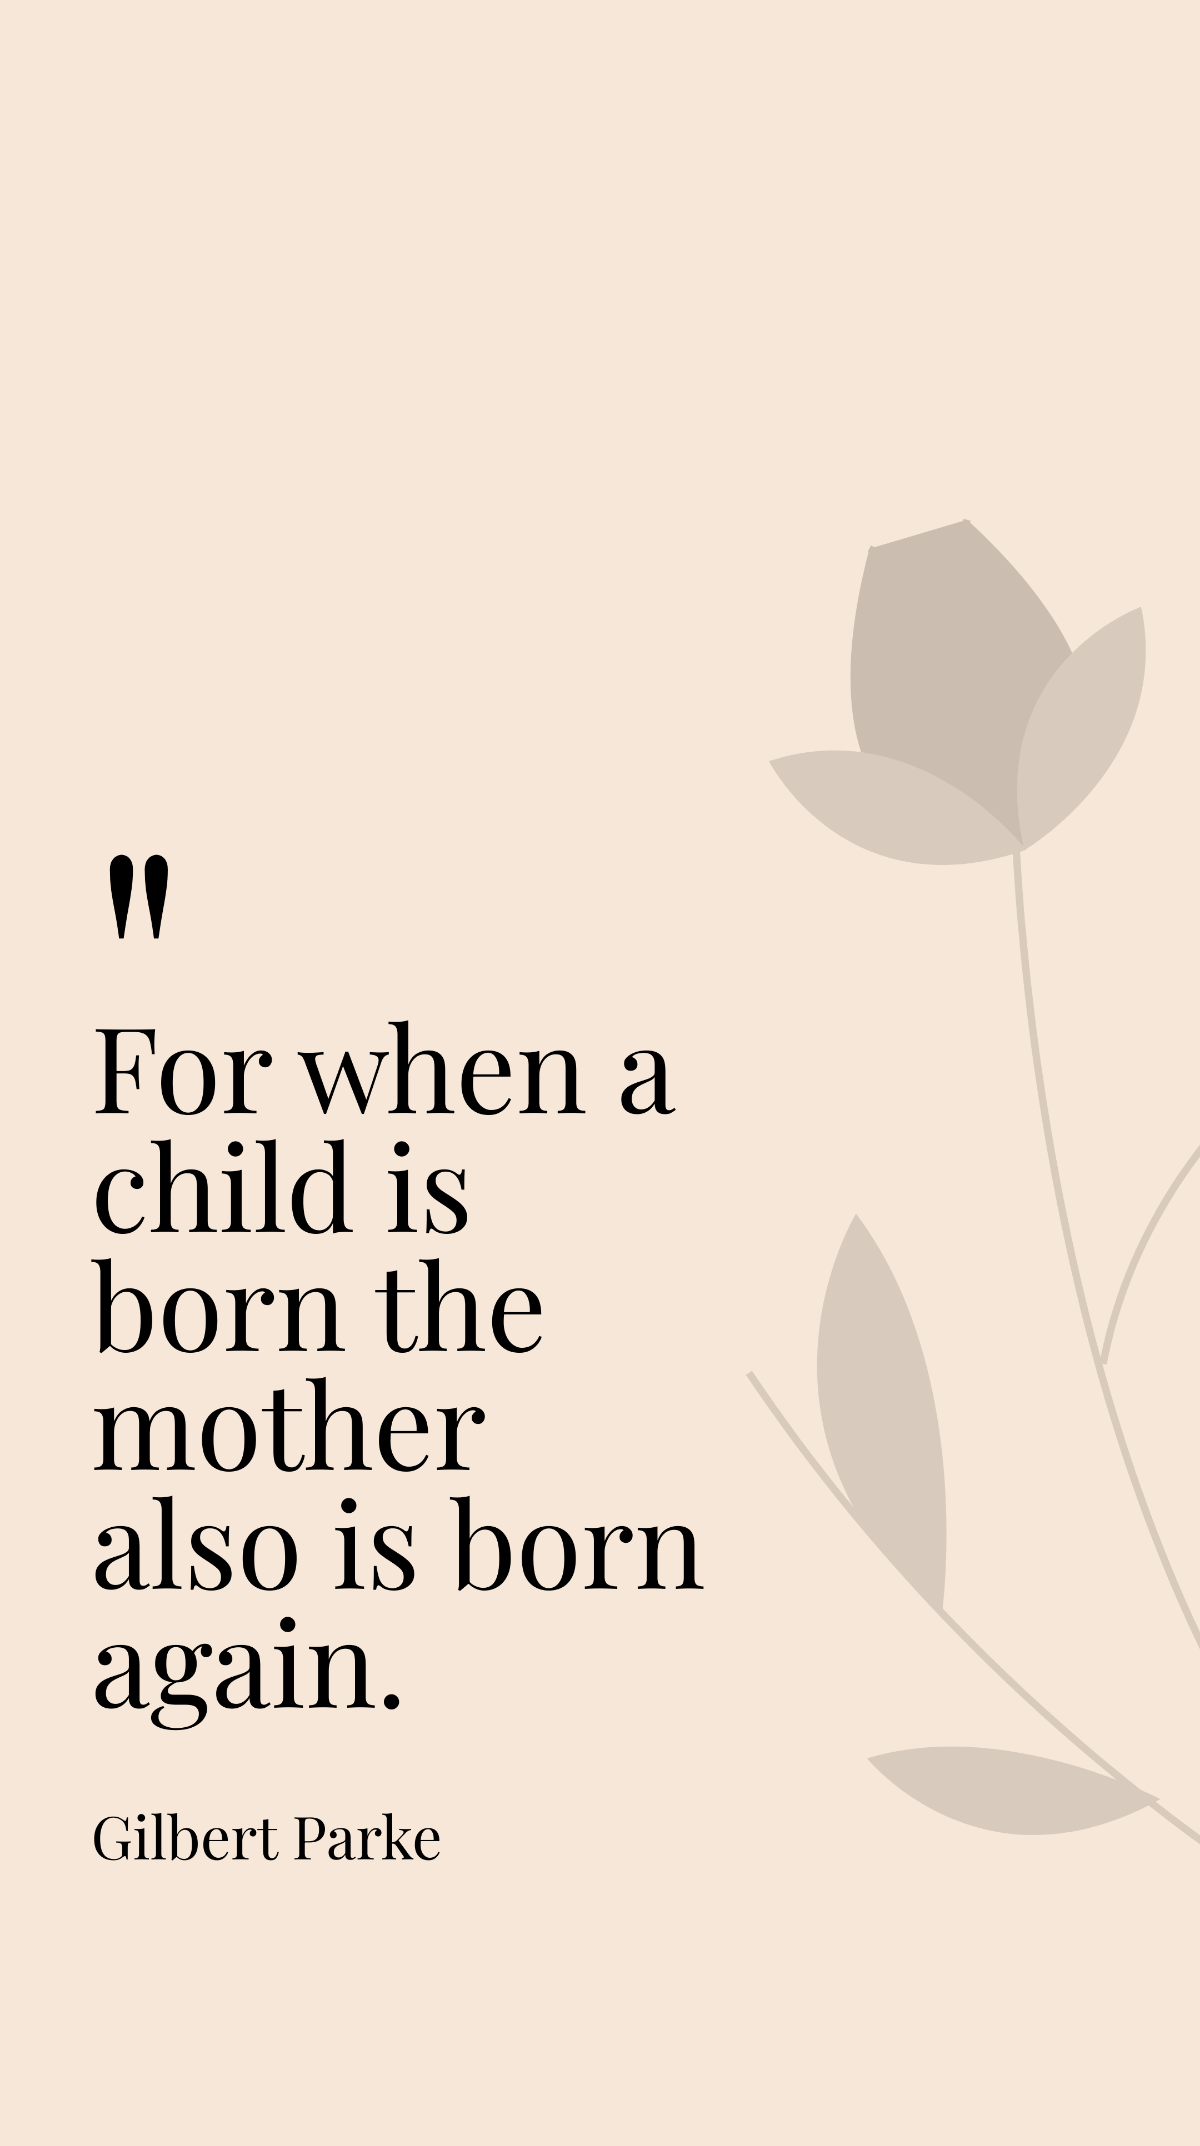 Gilbert Parke - For when a child is born the mother also is born again.  Template